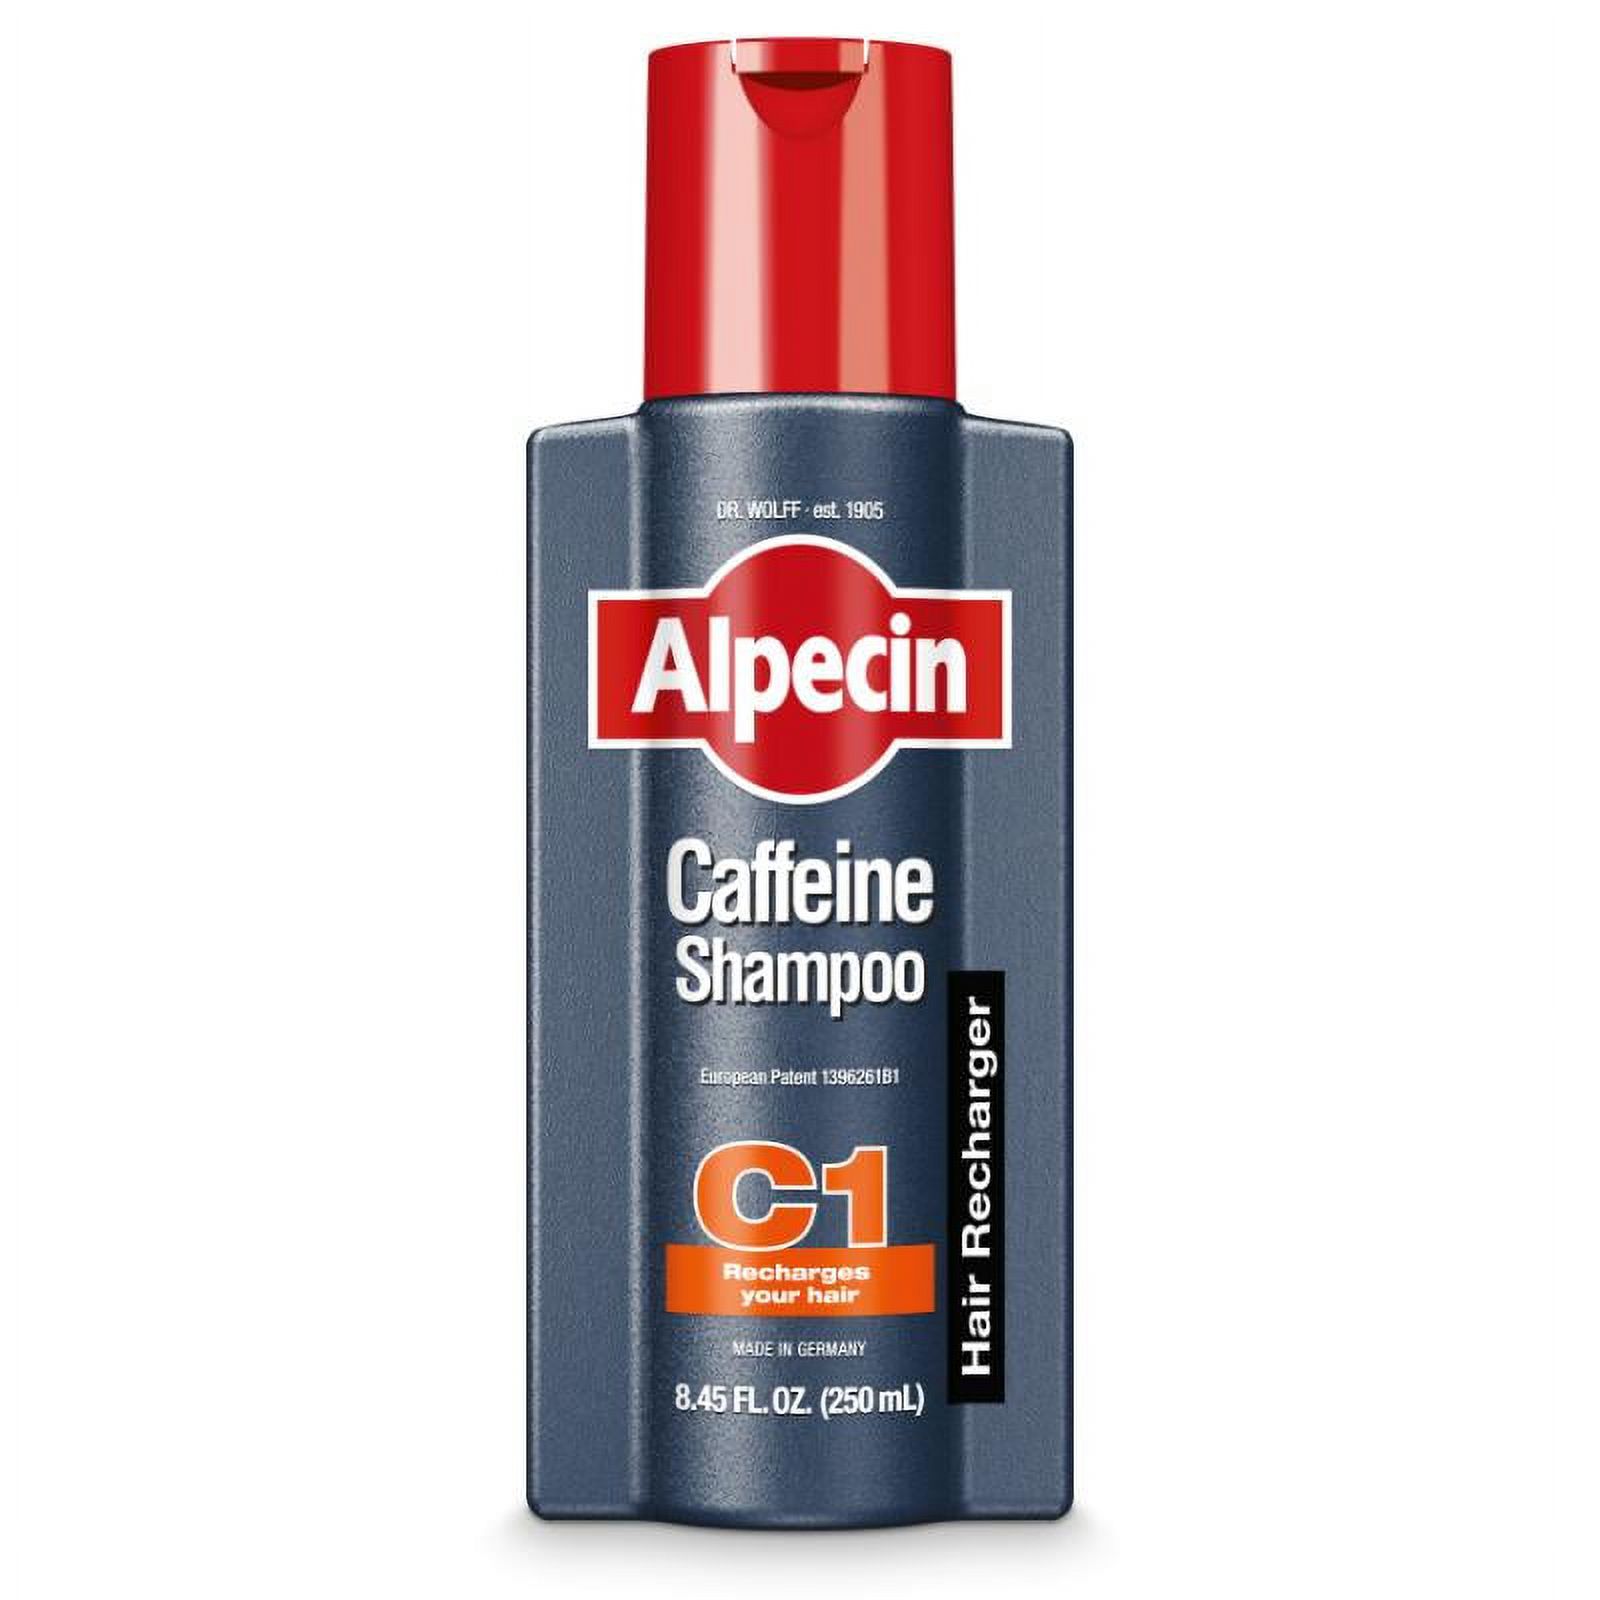 Alpecin Caffeine Shampoo C1 - Cleanses the Scalp to Promote Natural Hair Growth - image 1 of 4